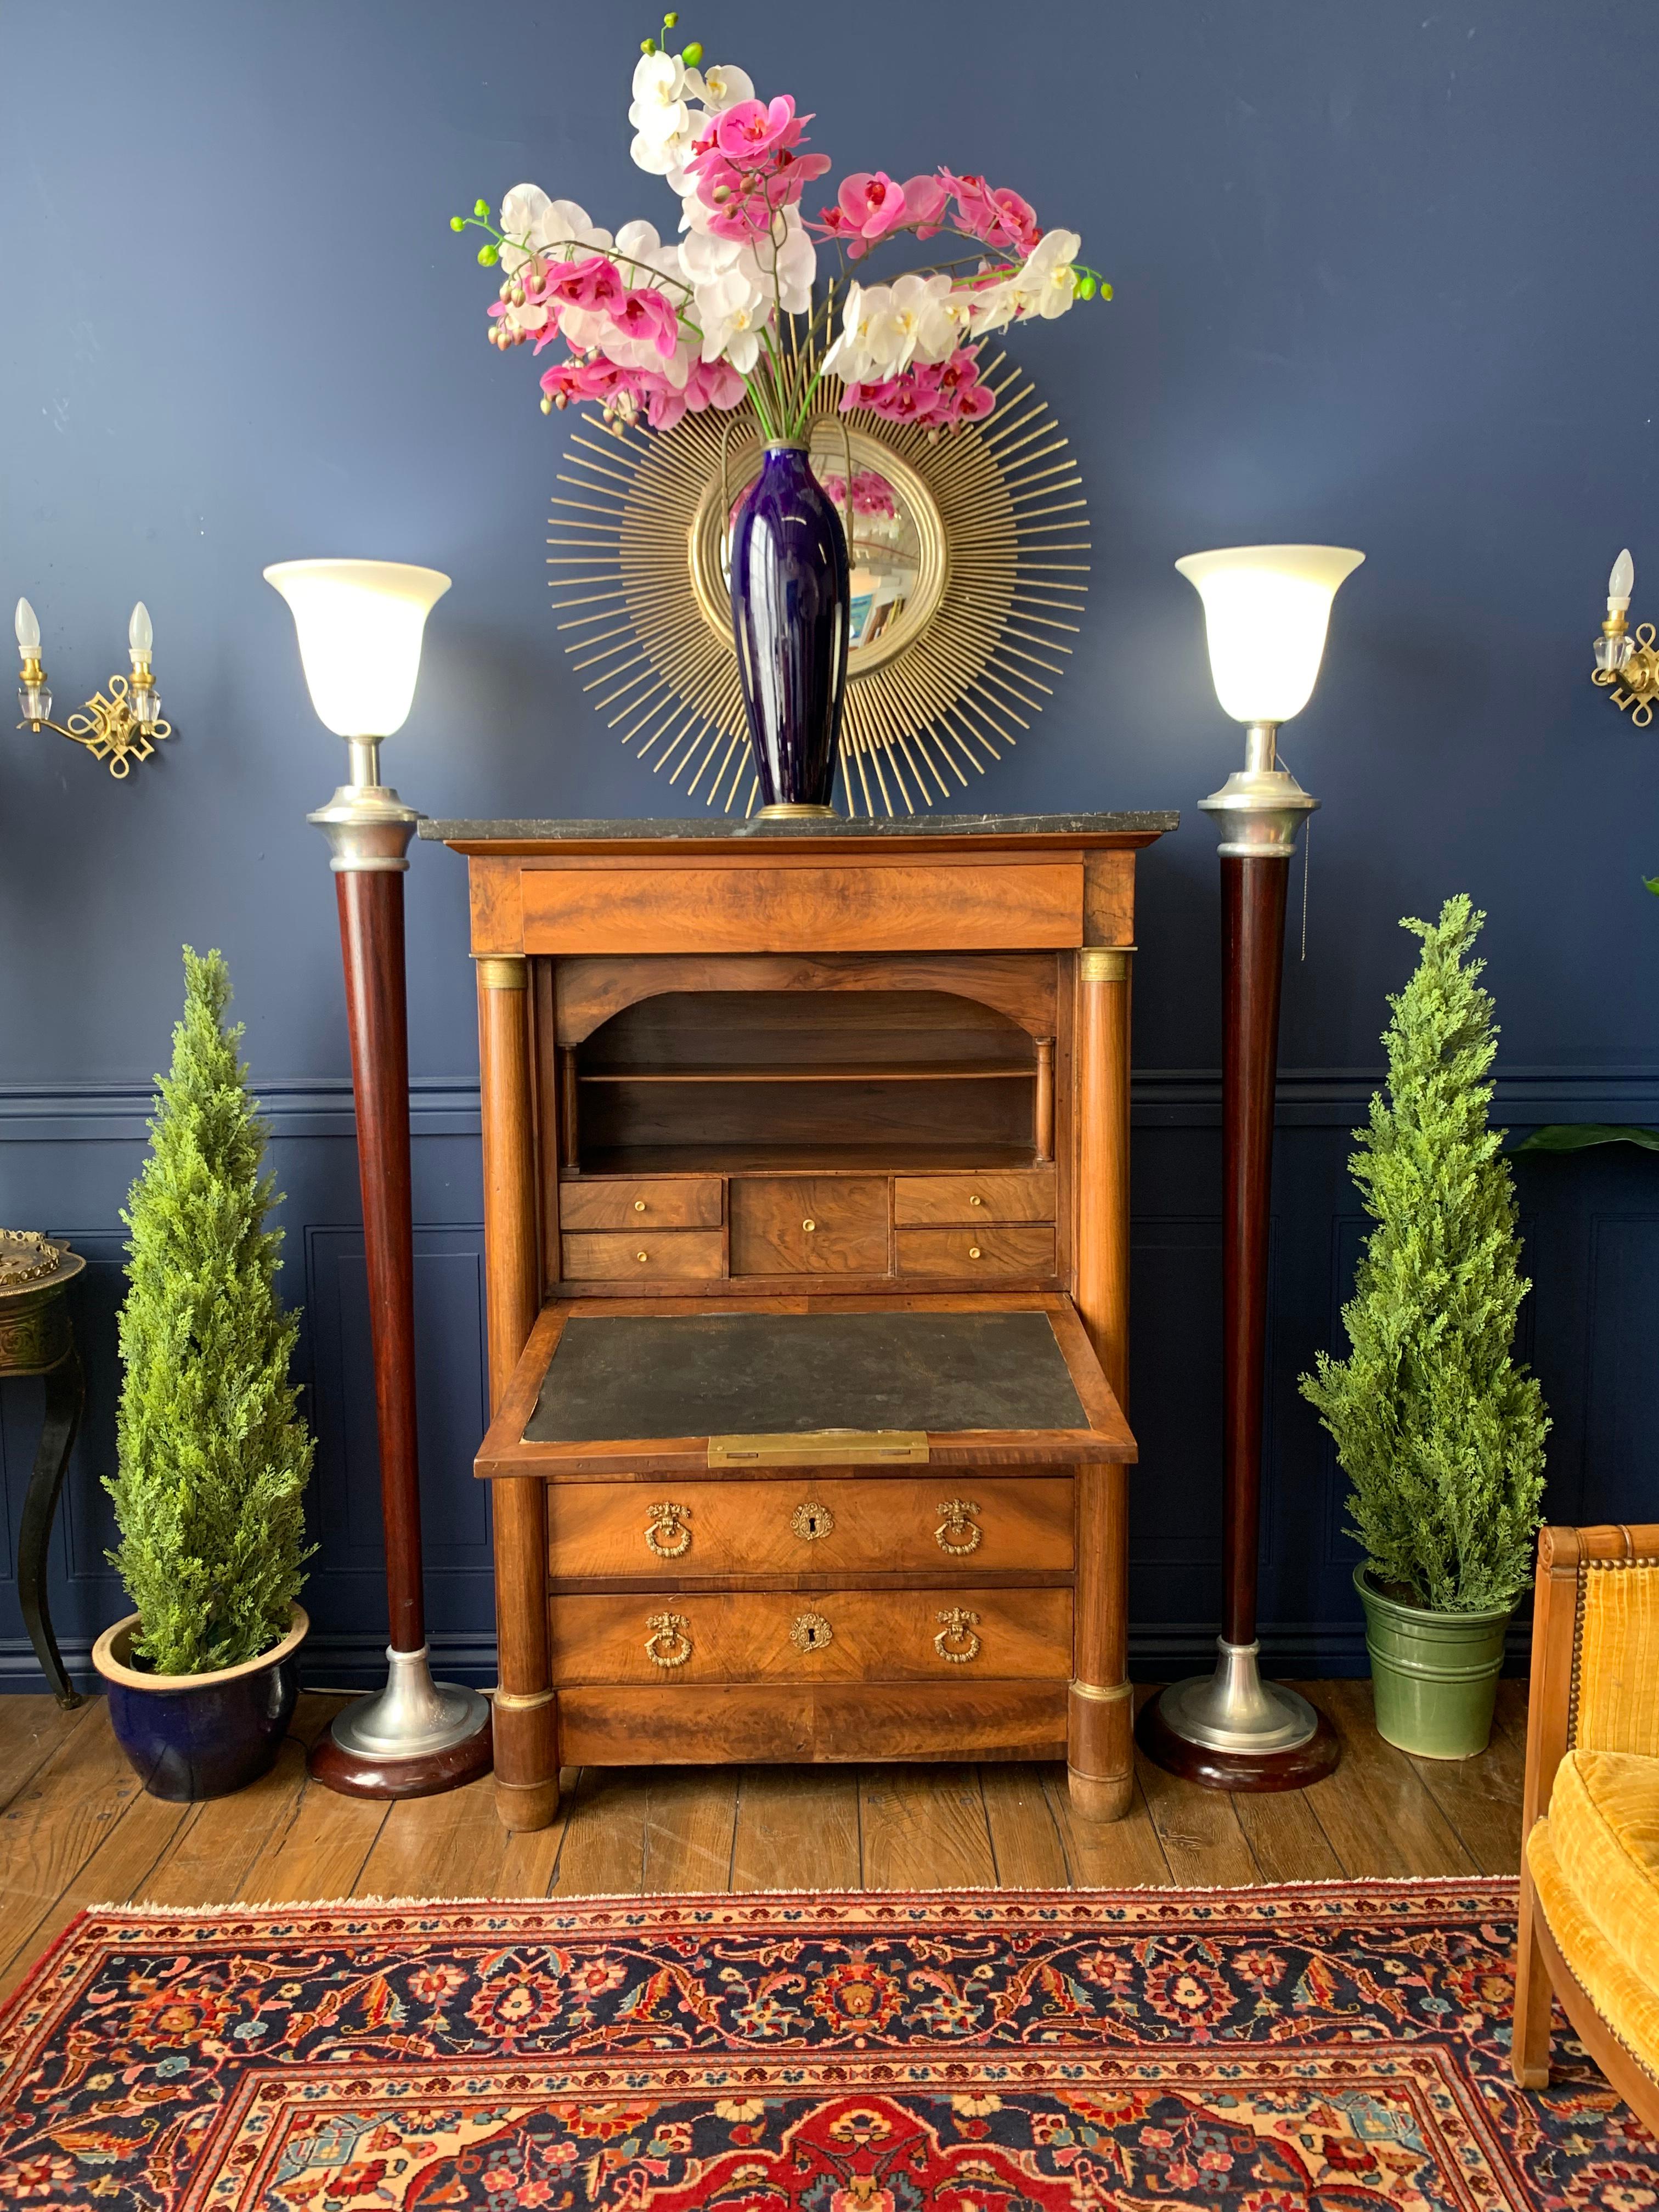 A 19th century French Empire drop front secretary with black as a marble top and side columns with bronze mounts, three drawers below and one drawer above. Double brass locking system.
The desk drops down to reveal a leather top writing surface and